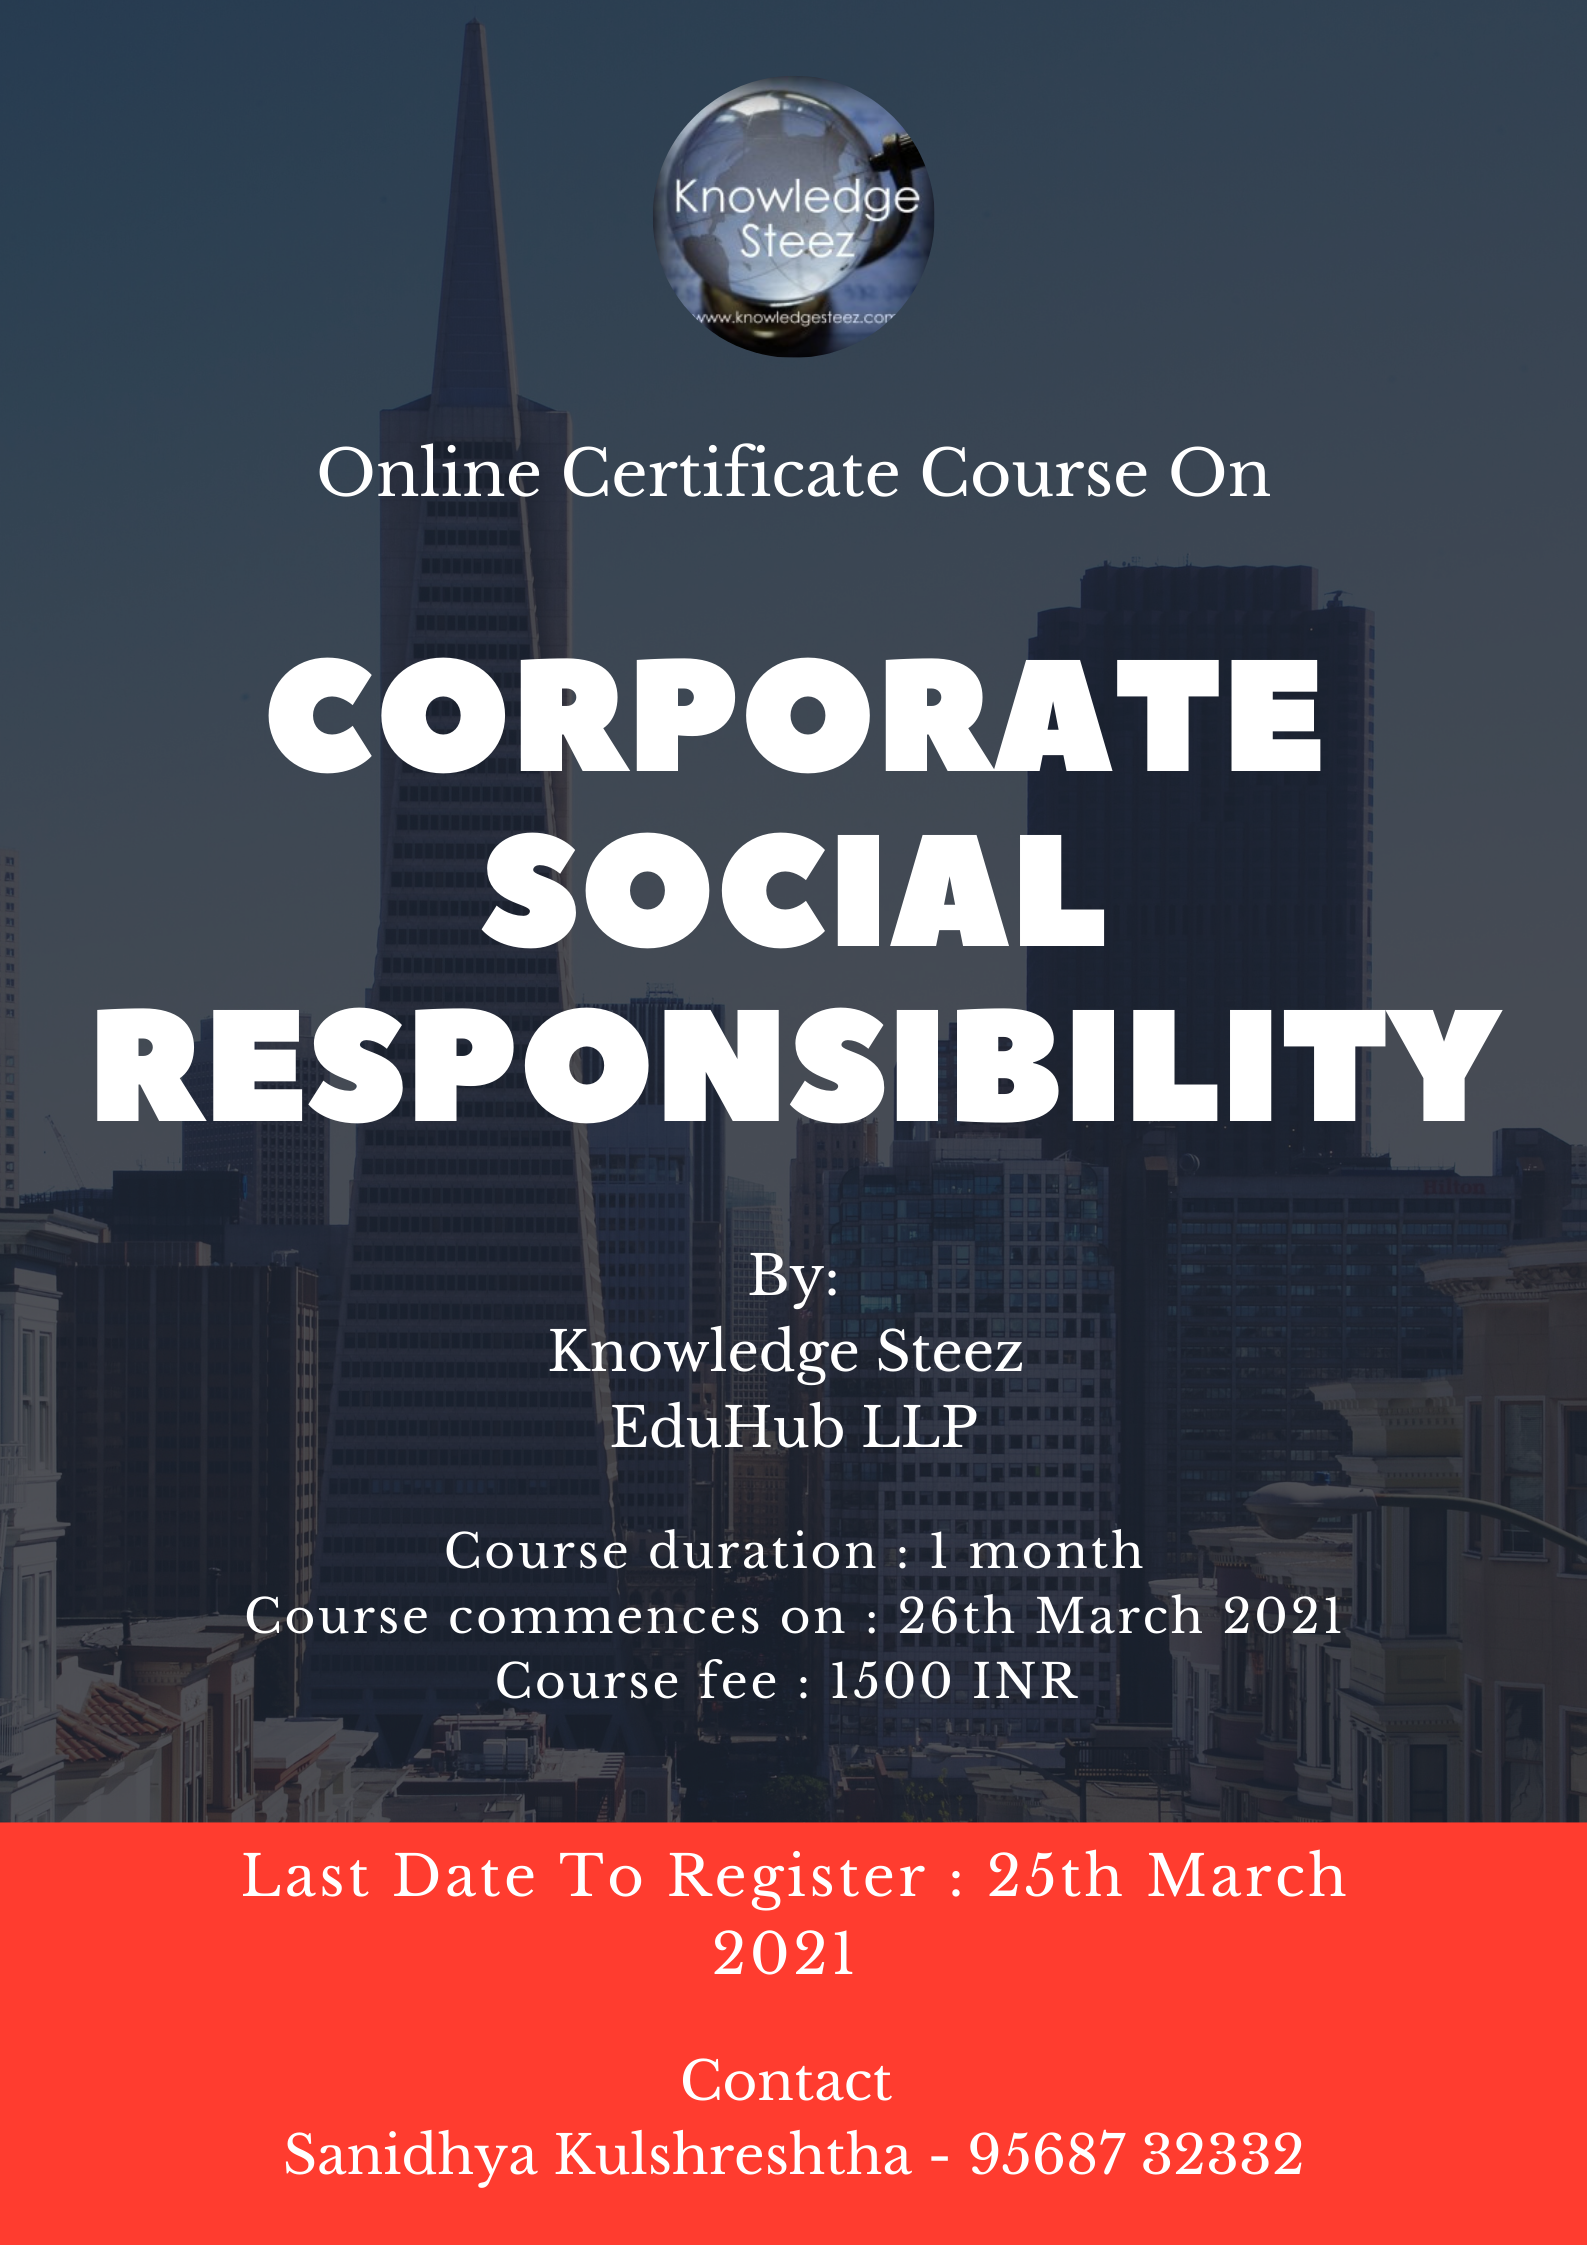 Online Certificate Course on Corporate Social Responsibility (Register by 25th March 2021)